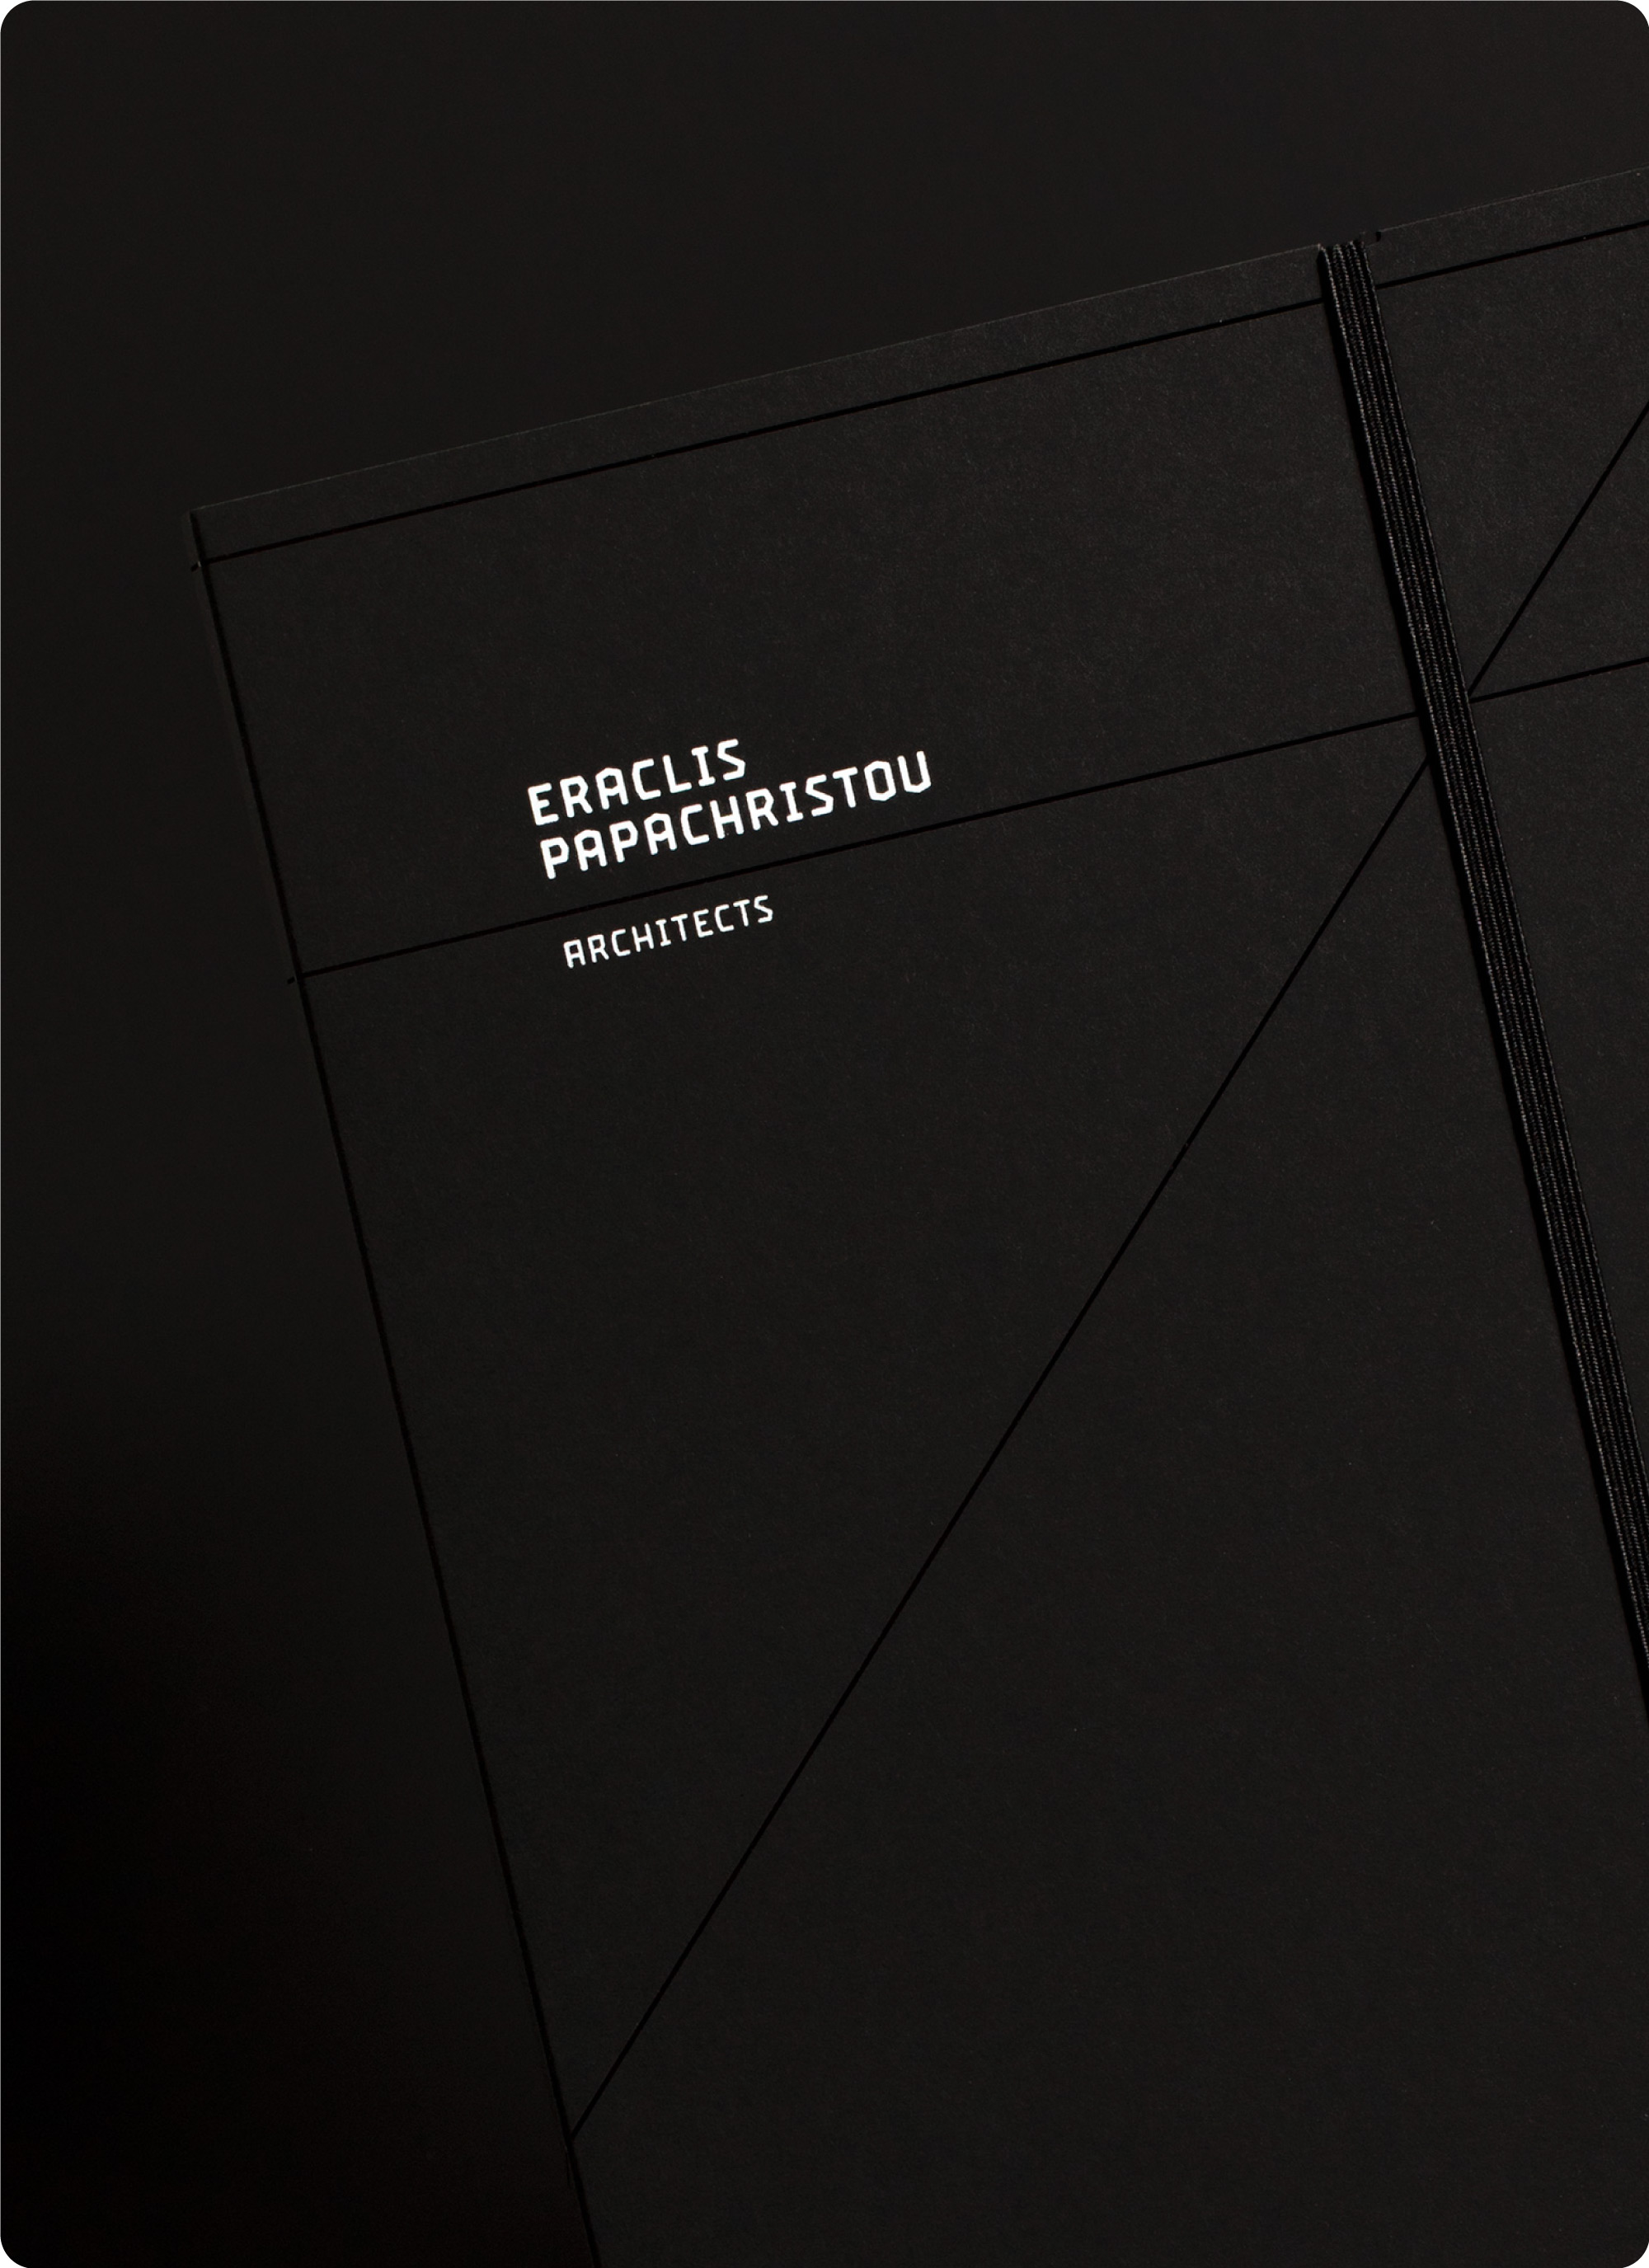 papachristou branding typeface in use kommigraphics